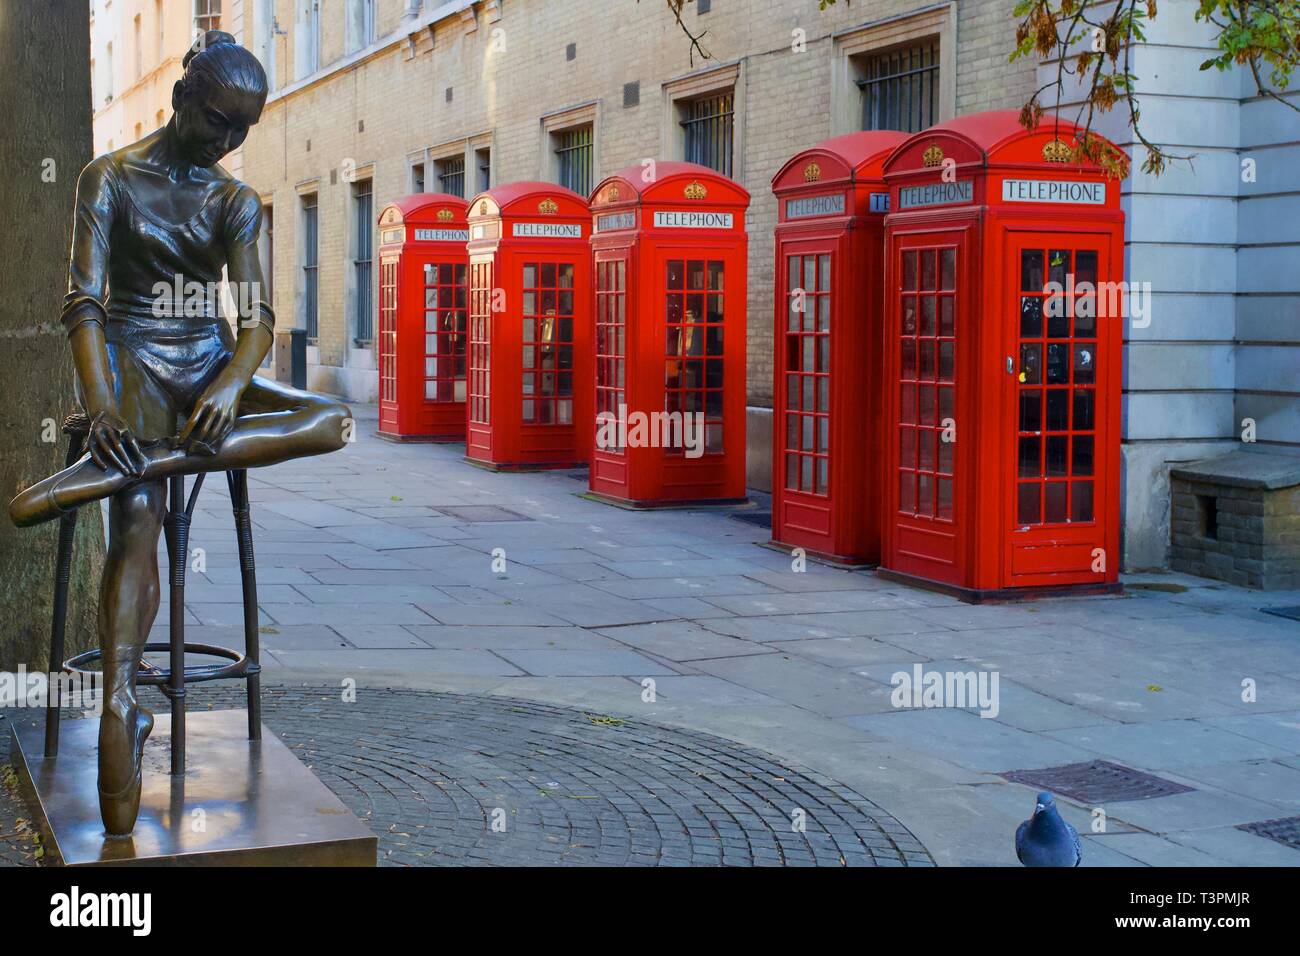 Red Telephone Boxes and statue of Dame Ninette de Valois by Enzo Plazzotta outside the Royal Opera House, Covent Garden, London, England. Stock Photo